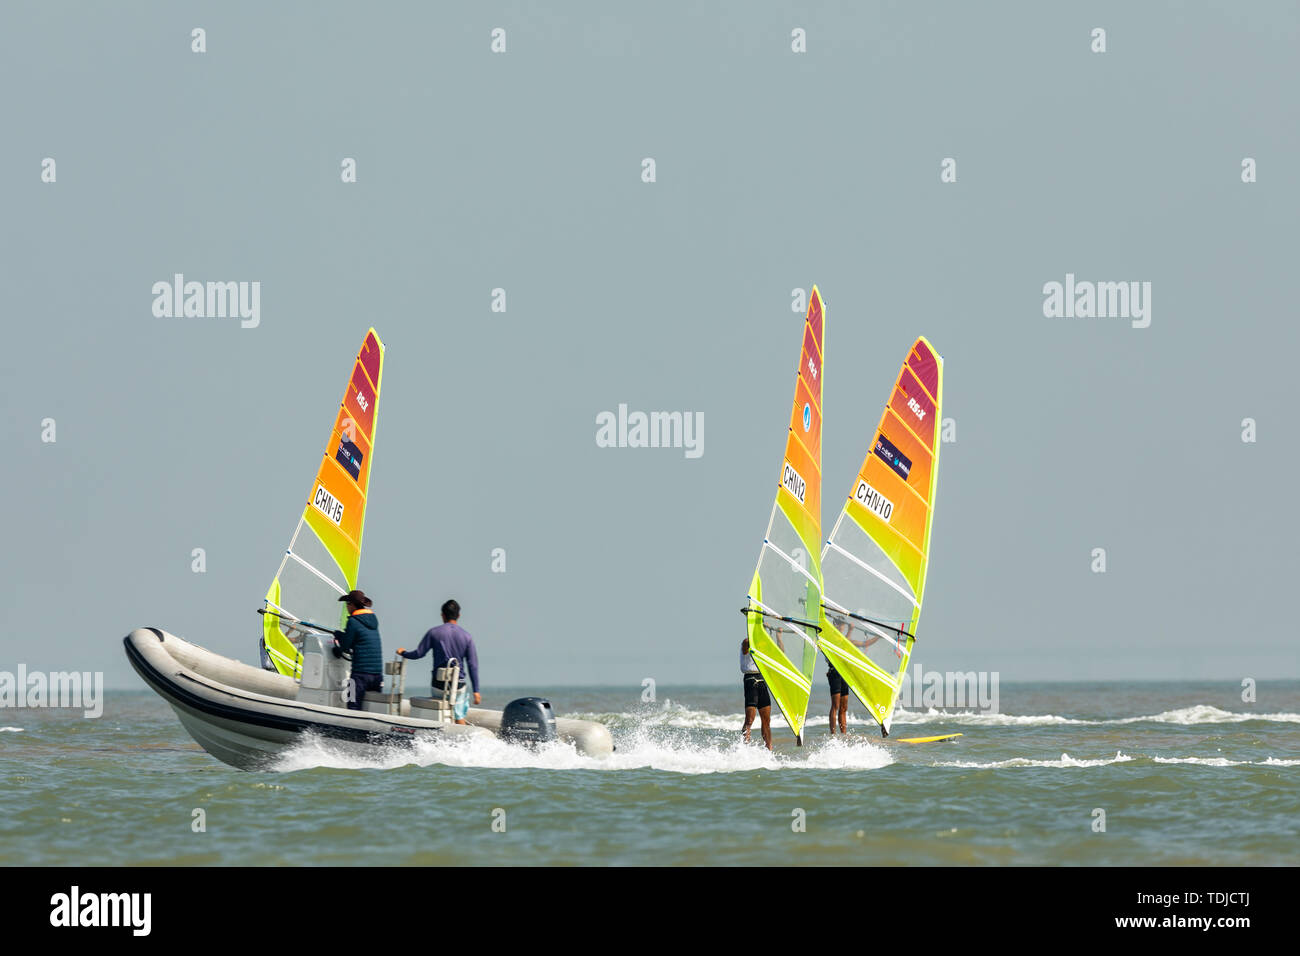 Beach Of Zhuhai High Resolution Stock Photography and Images - Alamy